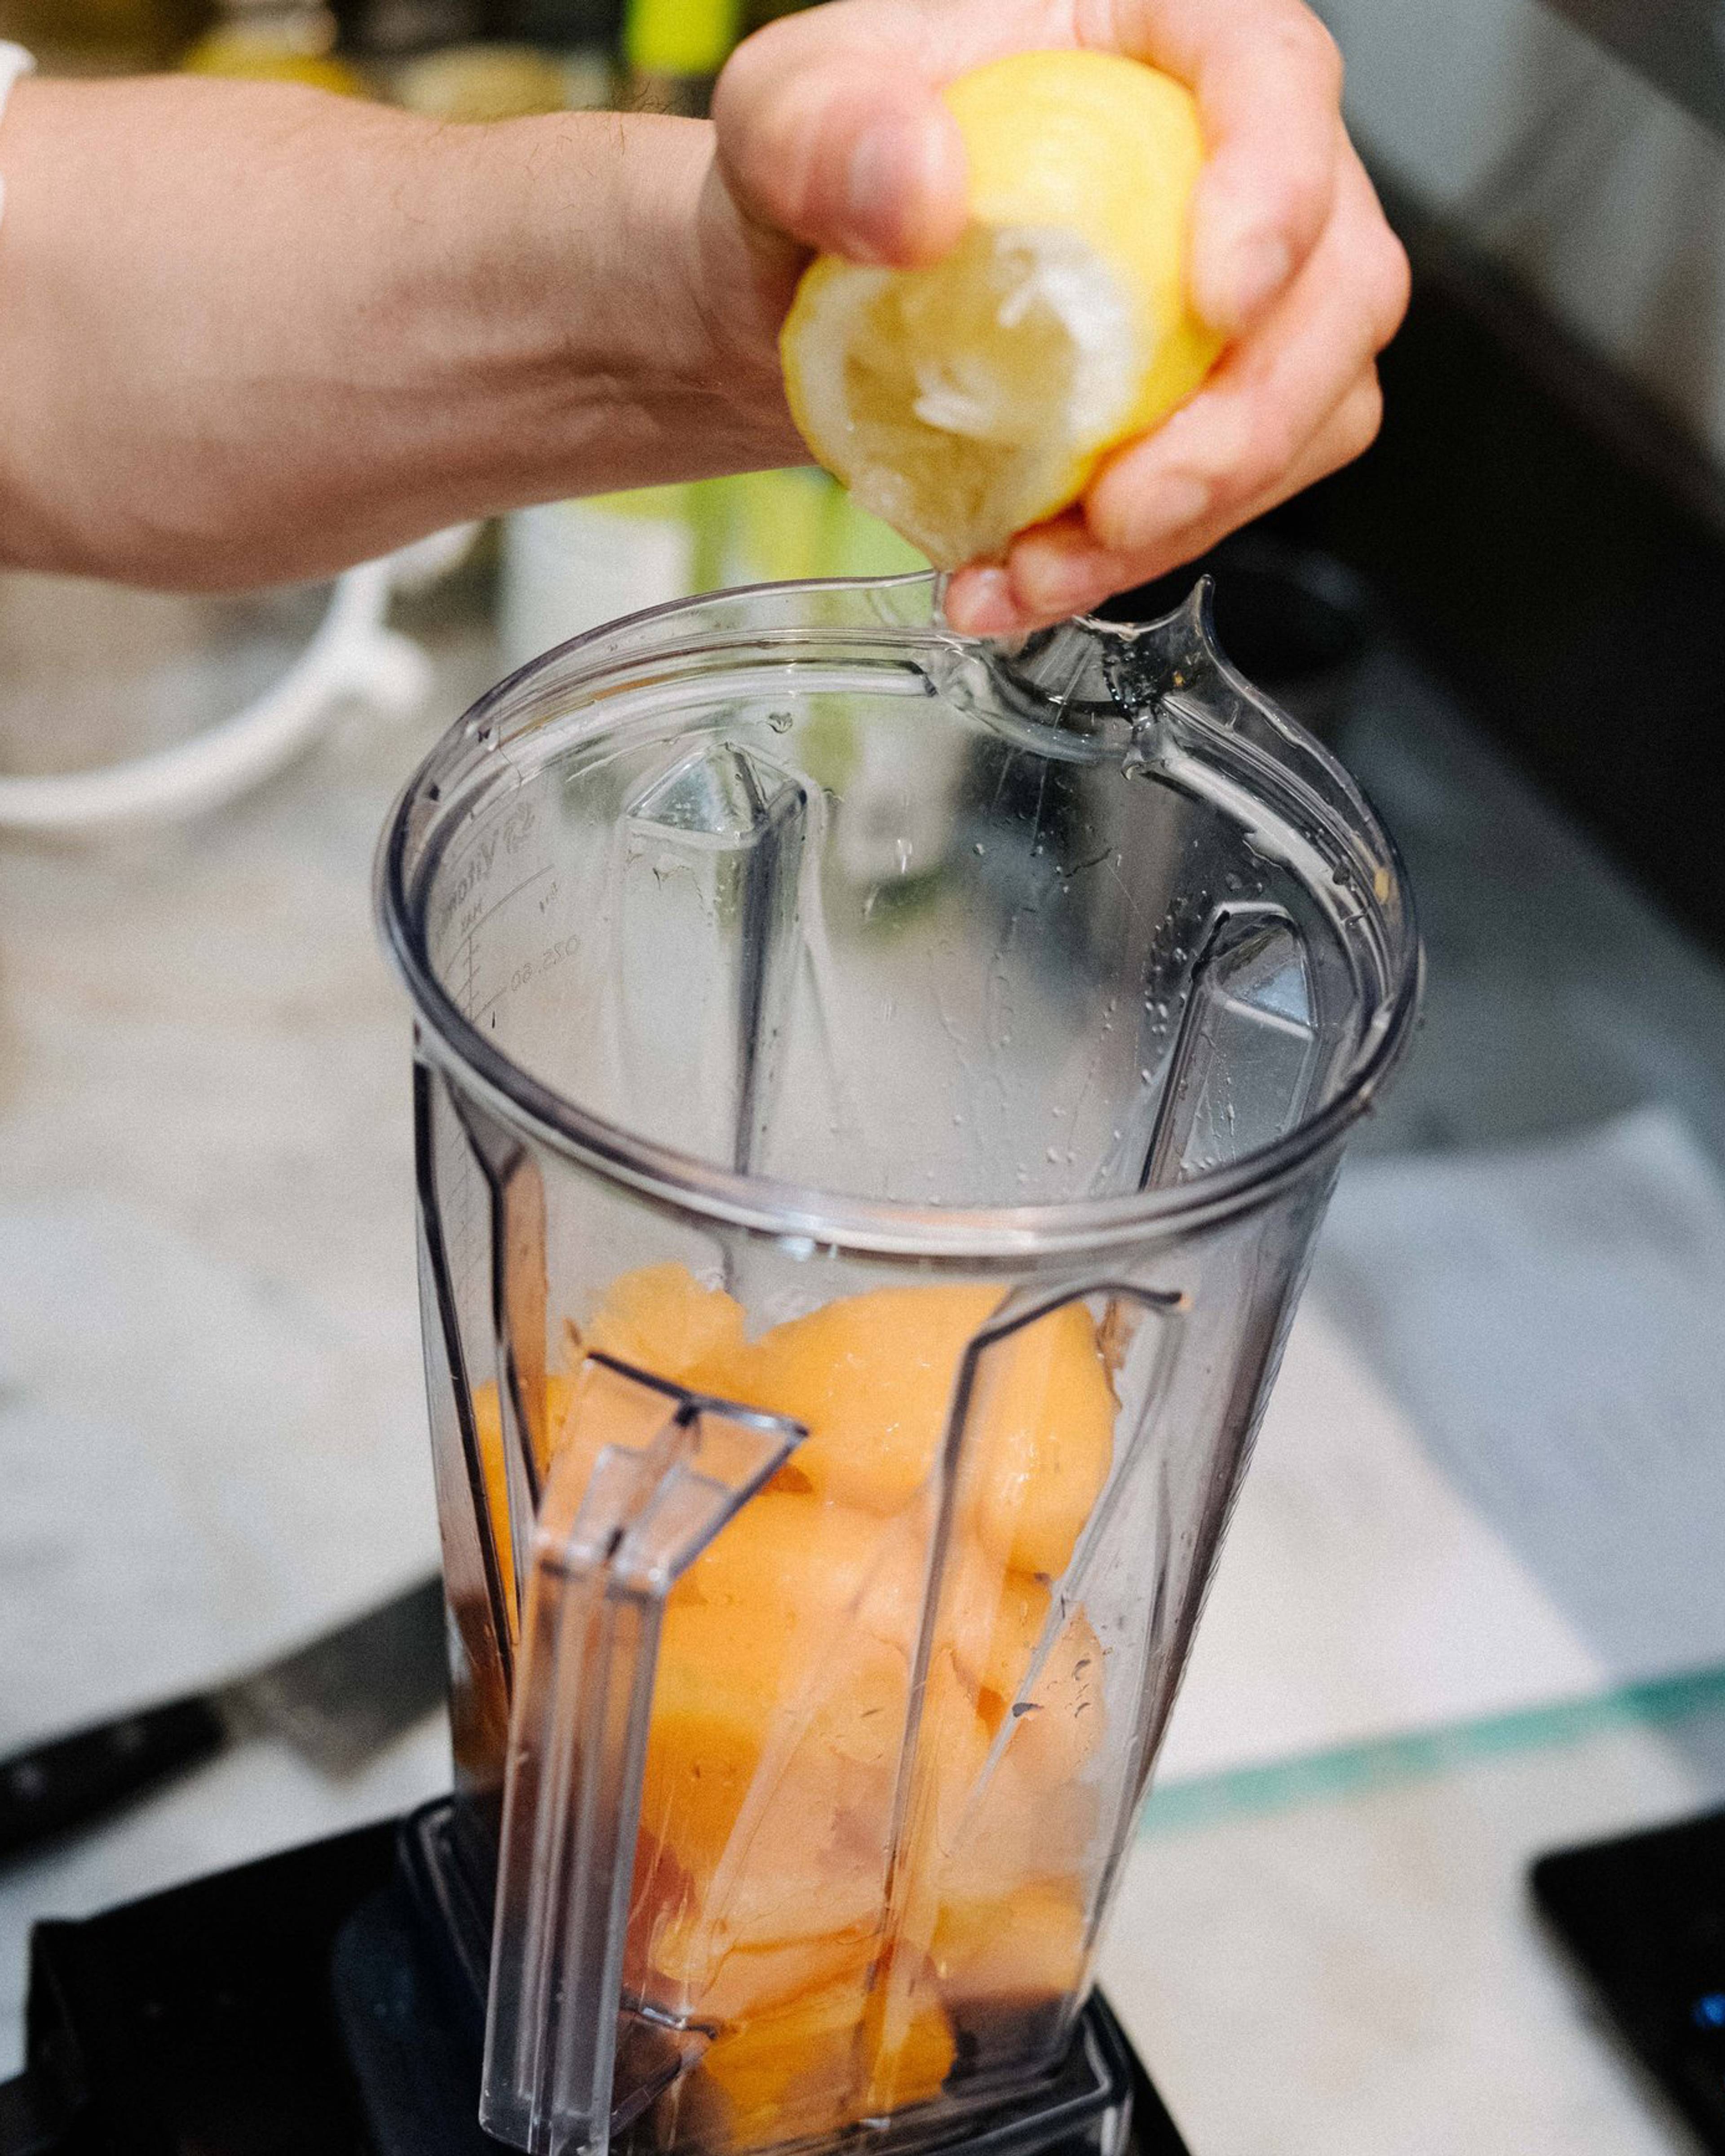 Squeezing lemon into the blender with other ingredients